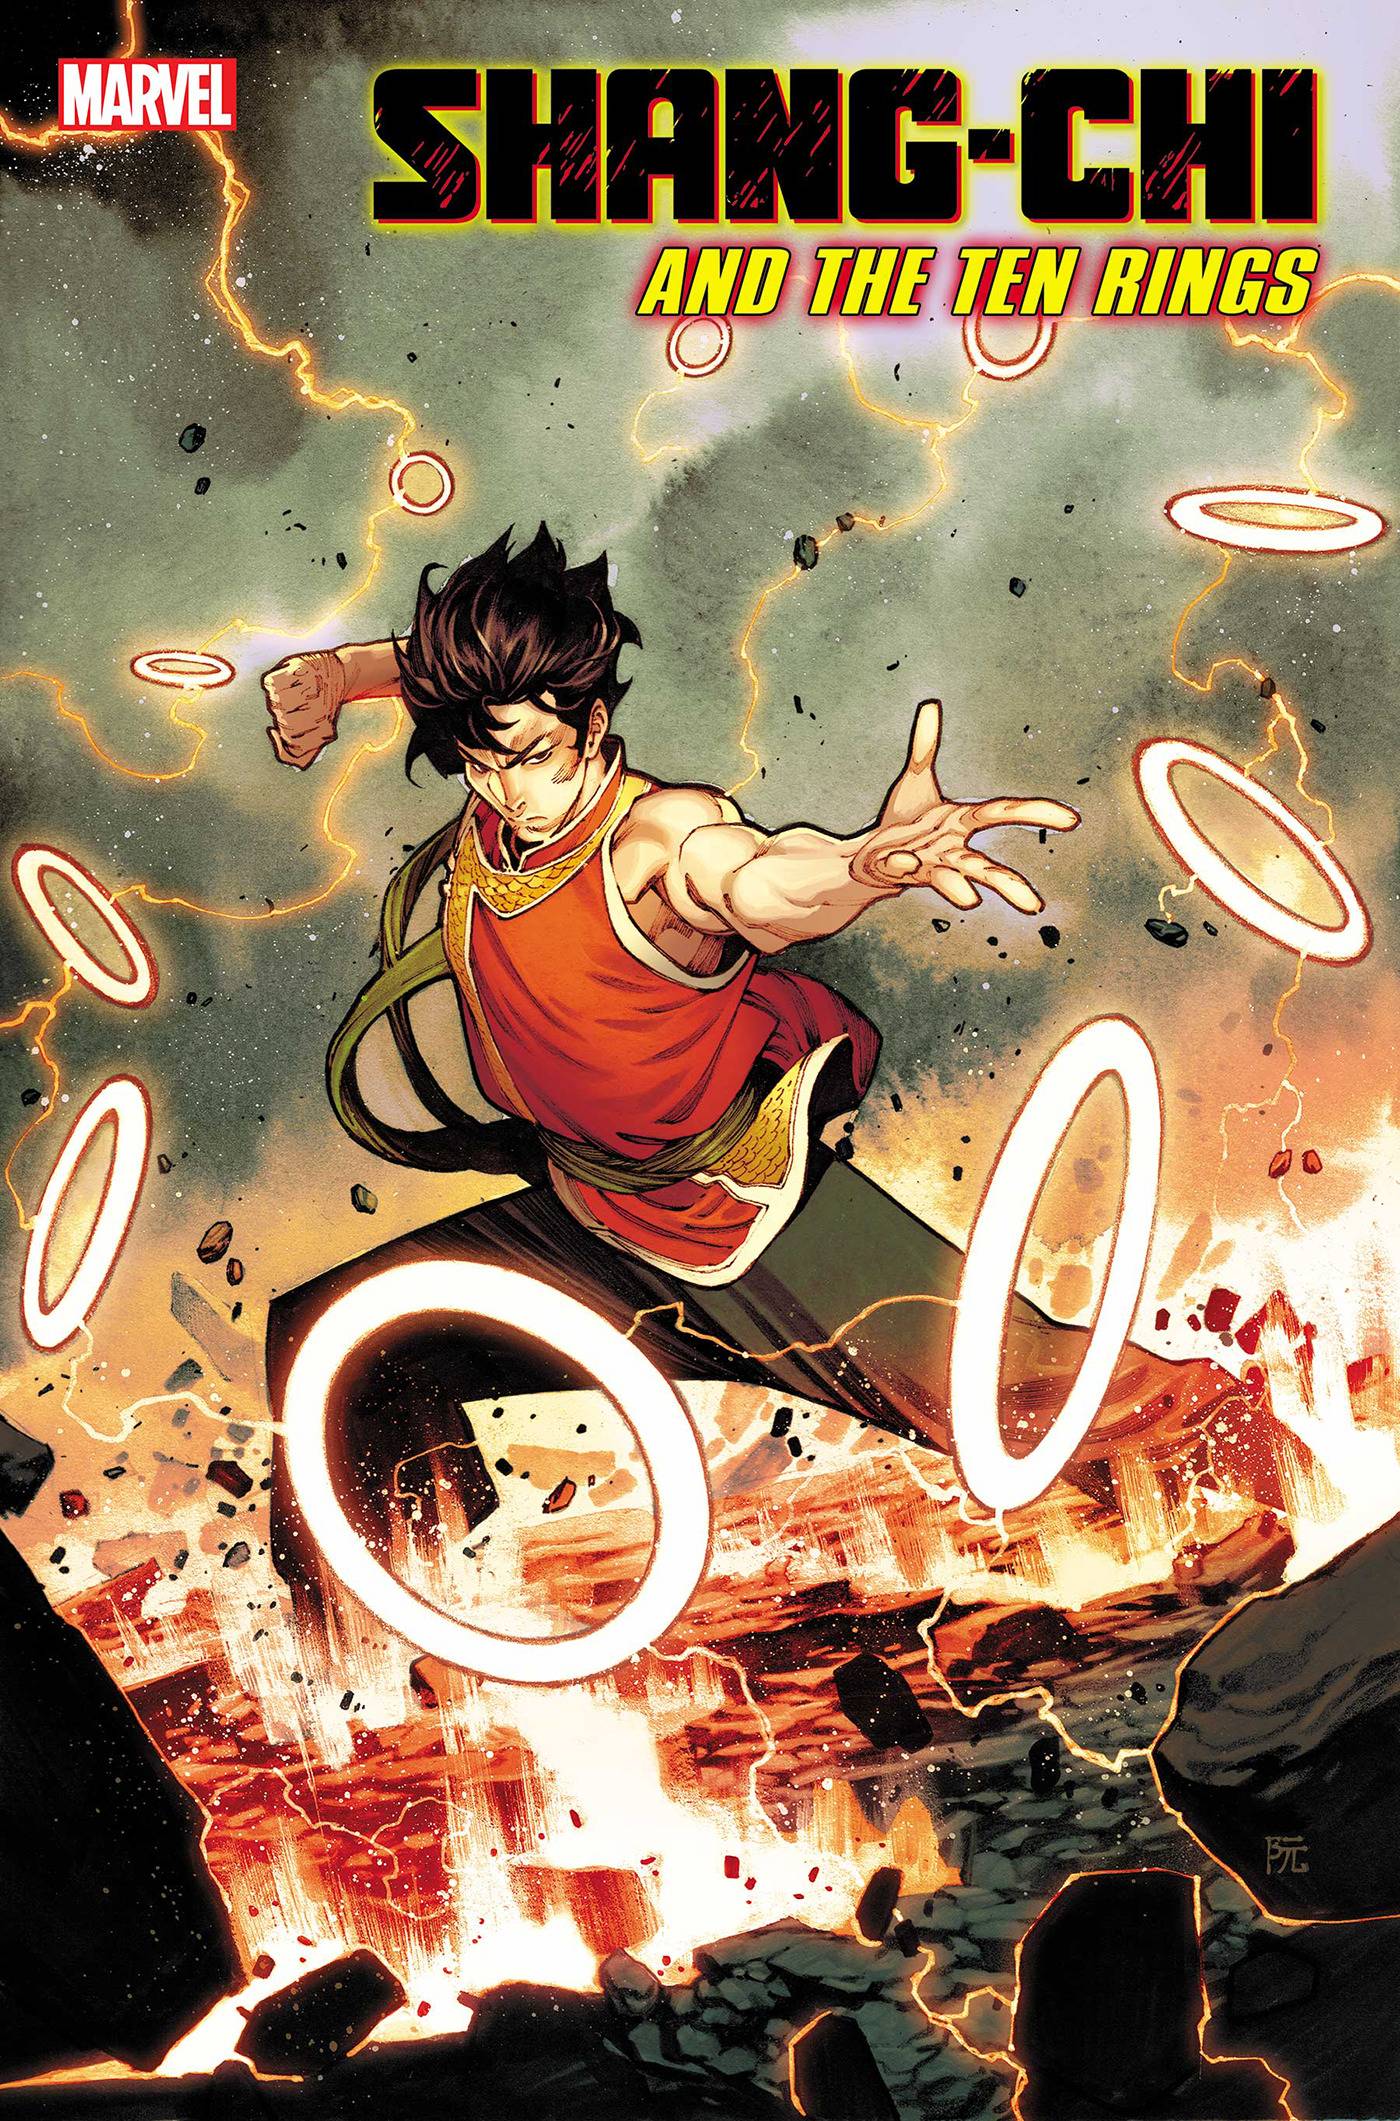 SHANG-CHI AND THE TEN RINGS #1 POSTER